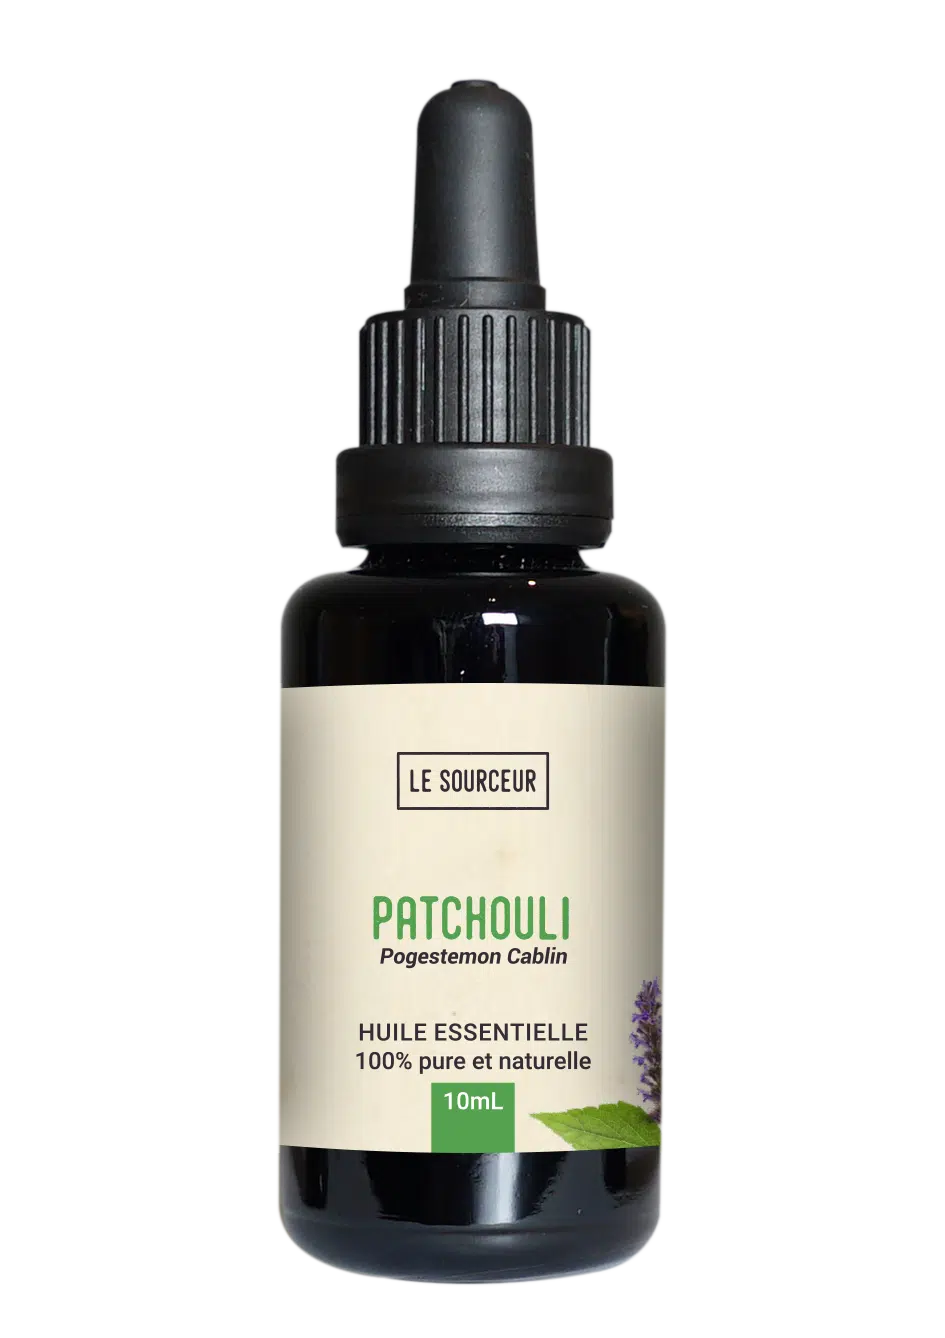 Bottle of essential oil of Patchouli